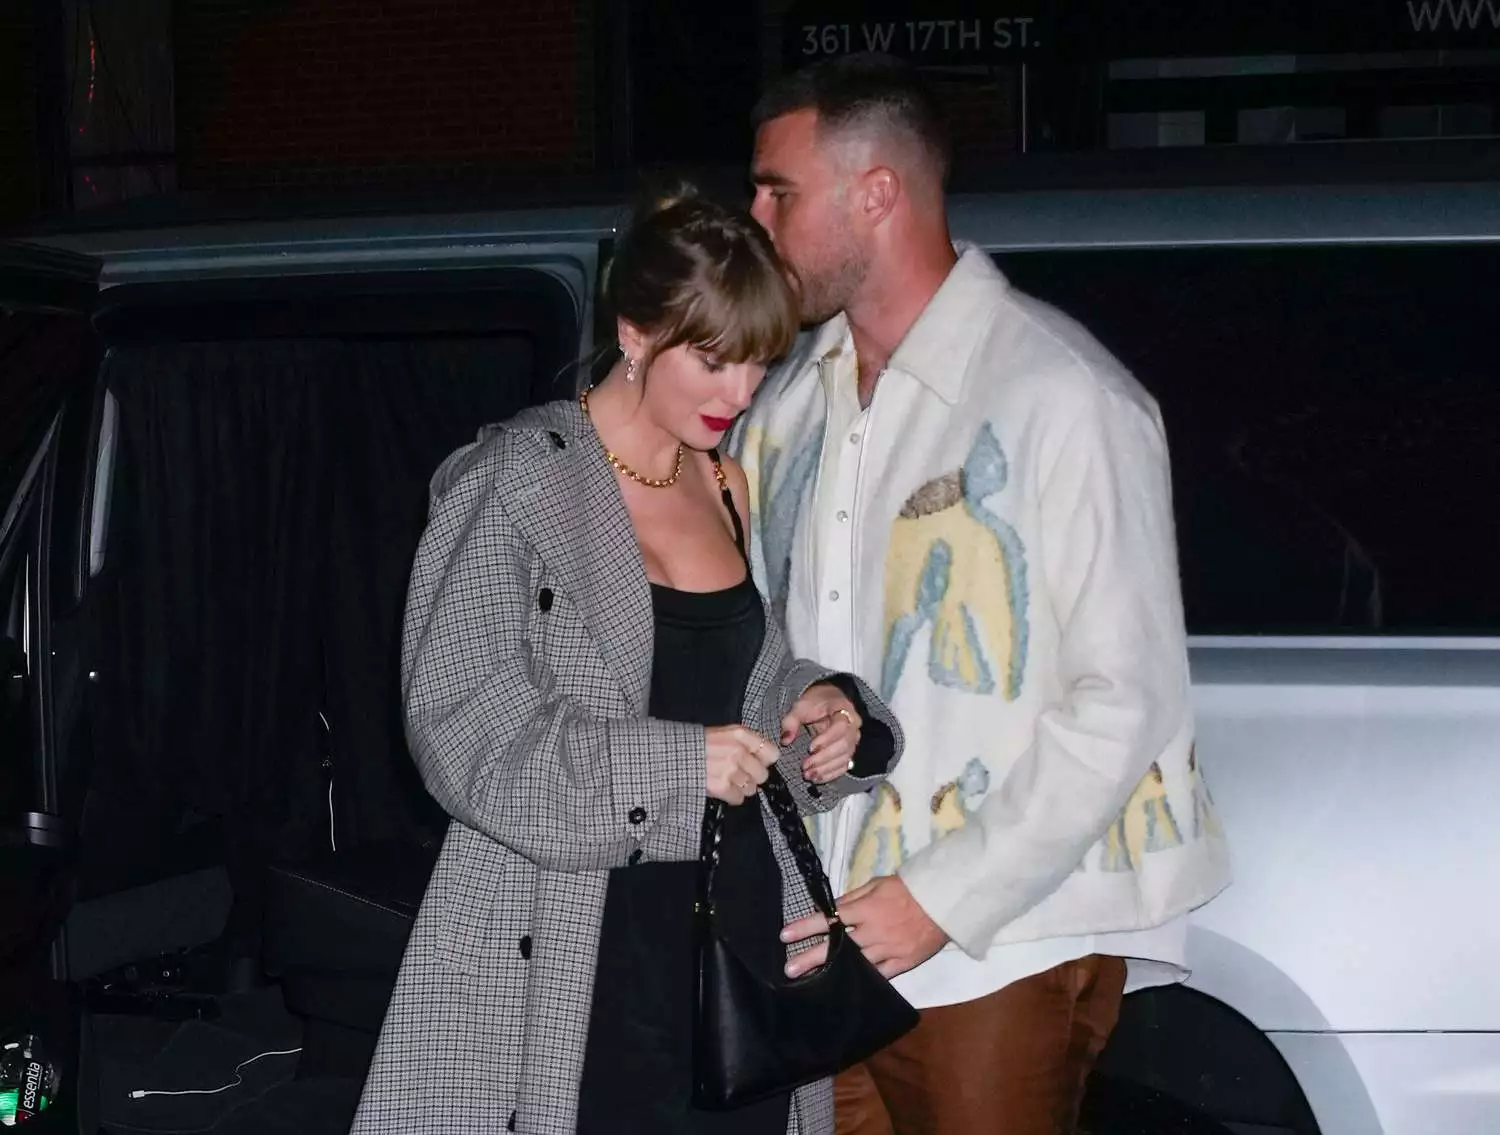 travis-kelce-grabbed-dinner-in-a-private-room-with-taylor-swift-in-argentina-says-source